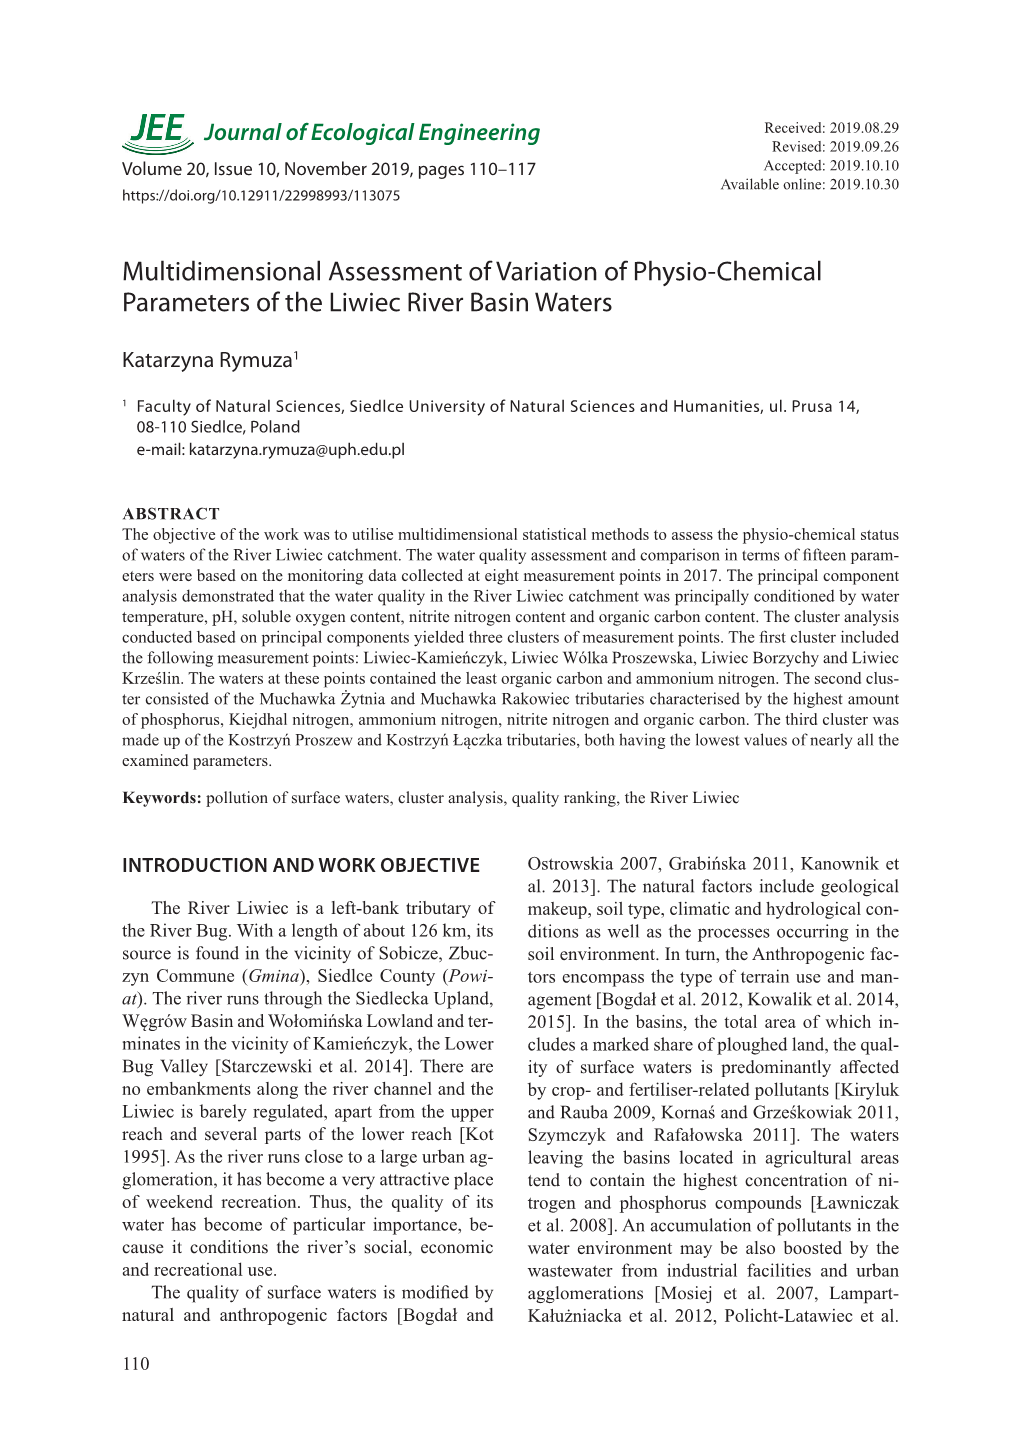 Multidimensional Assessment of Variation of Physio-Chemical Parameters of the Liwiec River Basin Waters